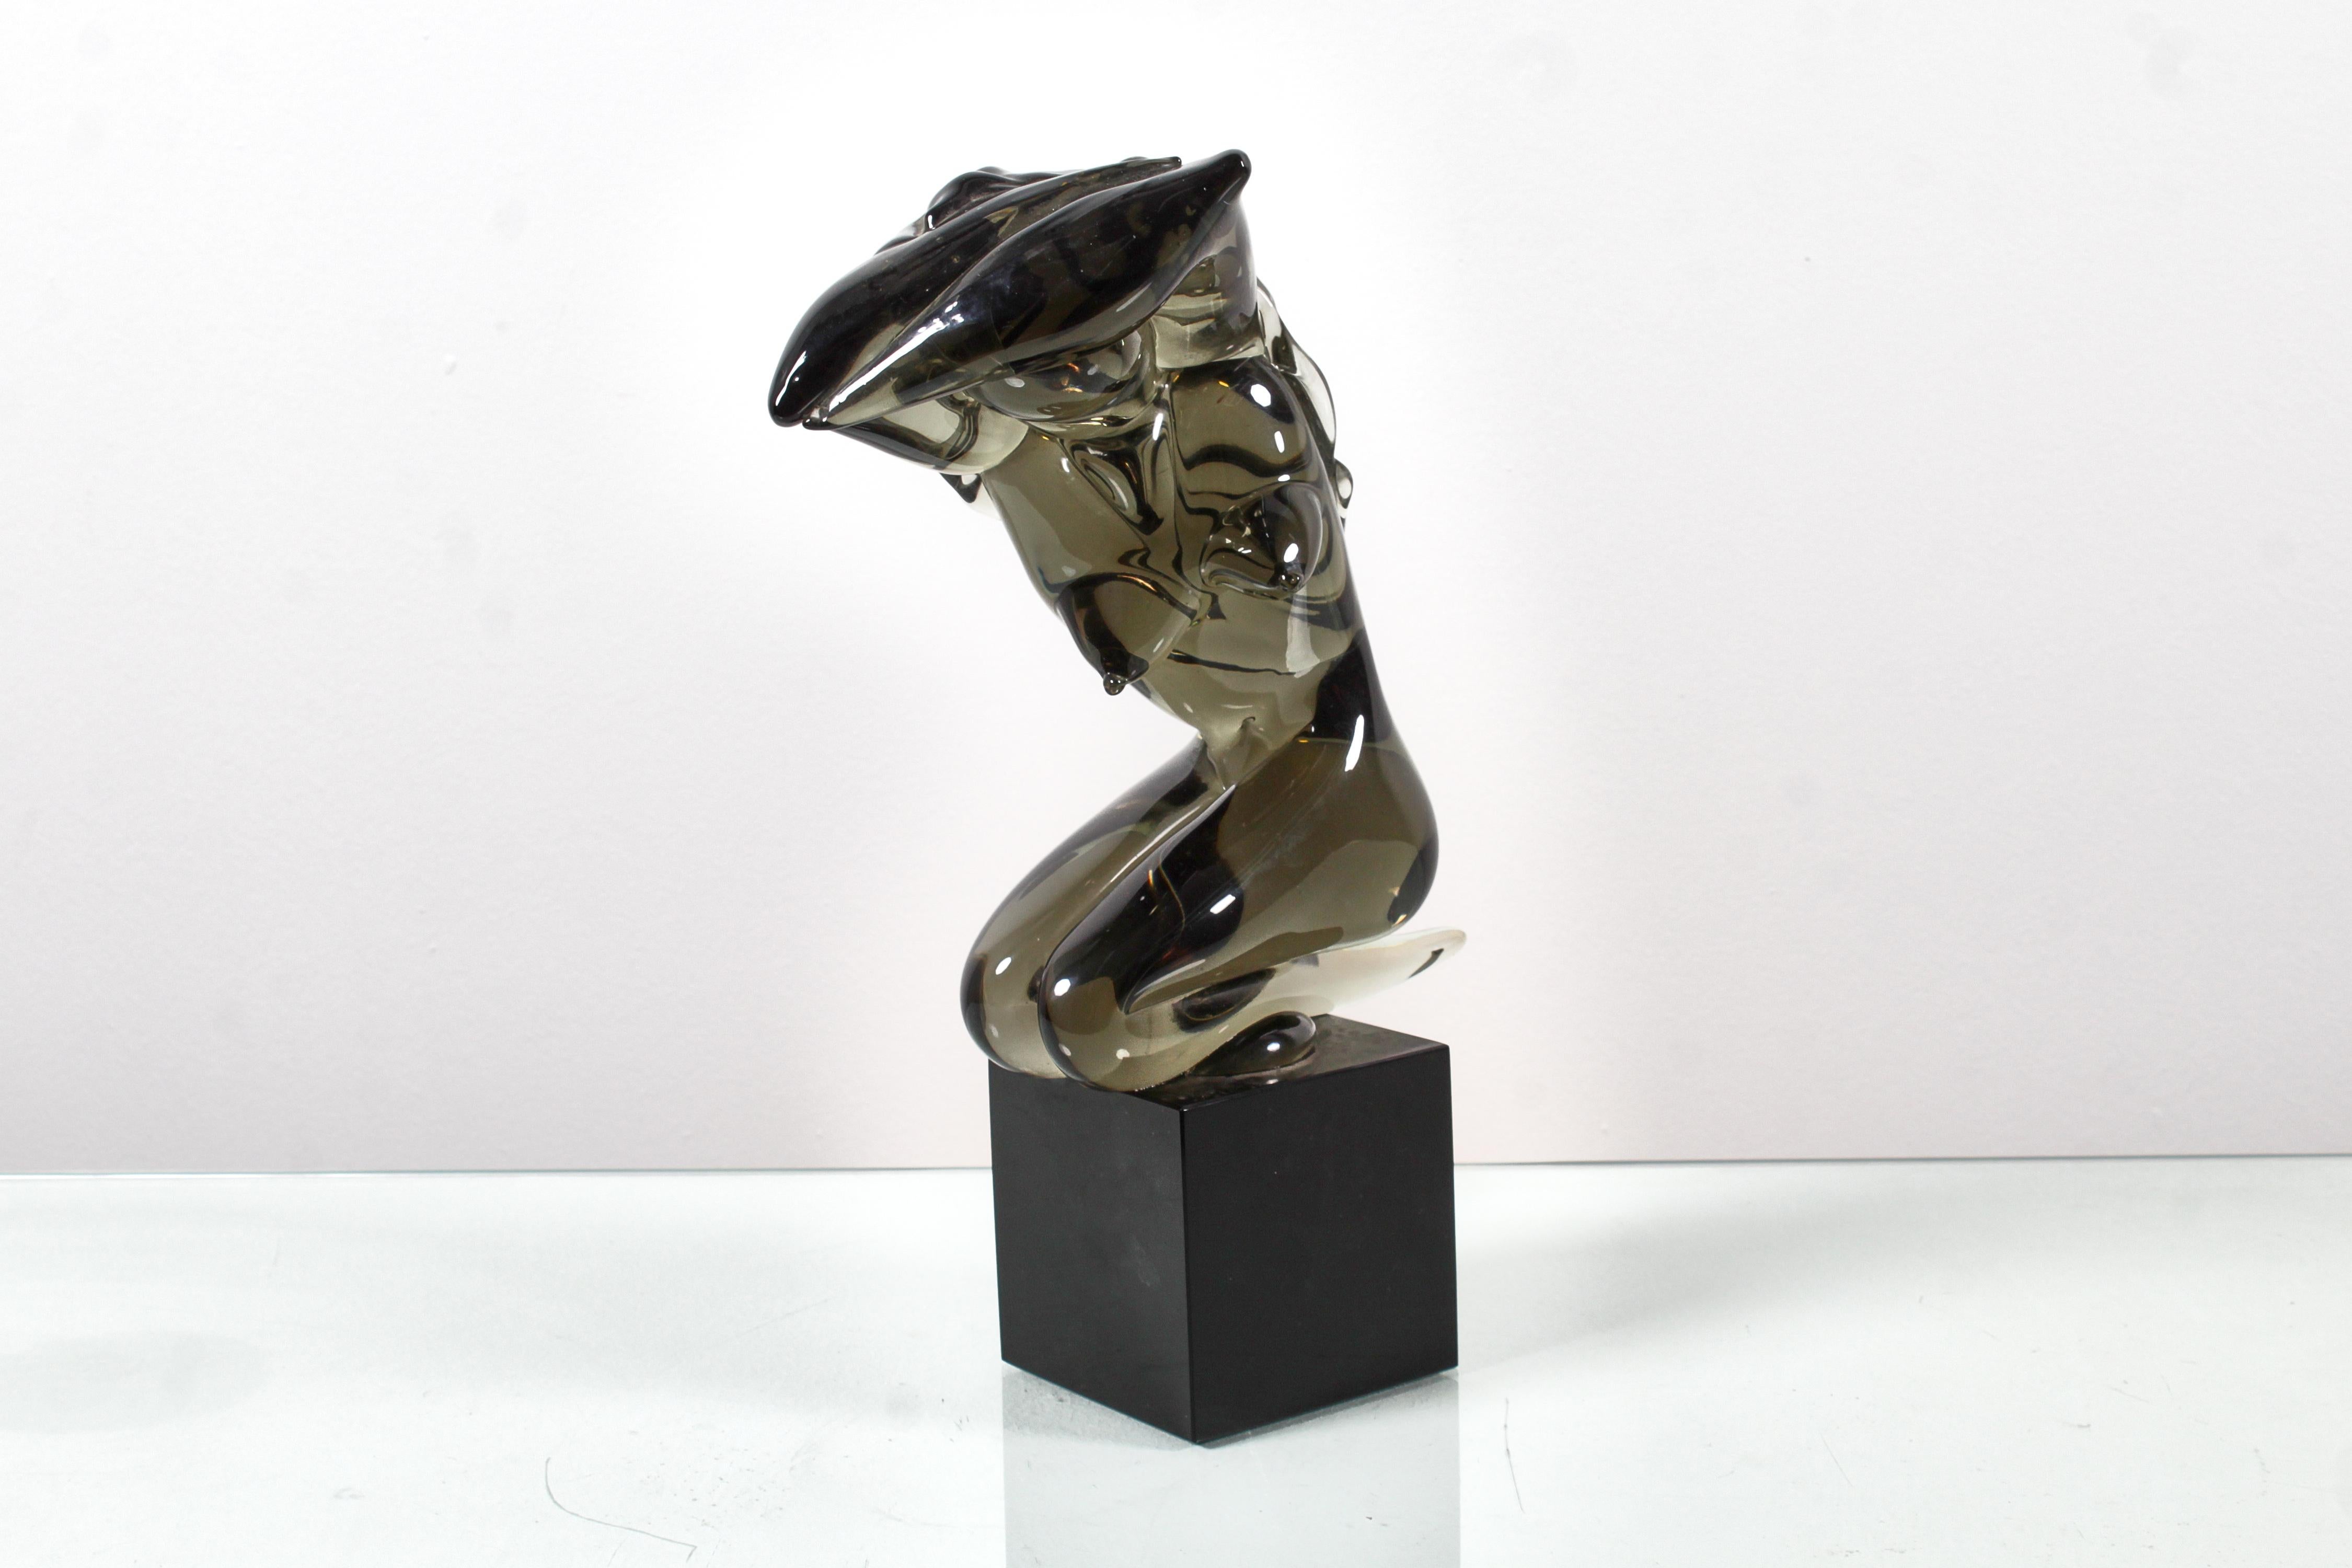 Delightful sculpture depicting a stylized woman's body in smoky green Murano glass on a cubic black glass pedestal. The artwork, created in the 1970s, can be attributed to the Murano manifacturer Seguso.